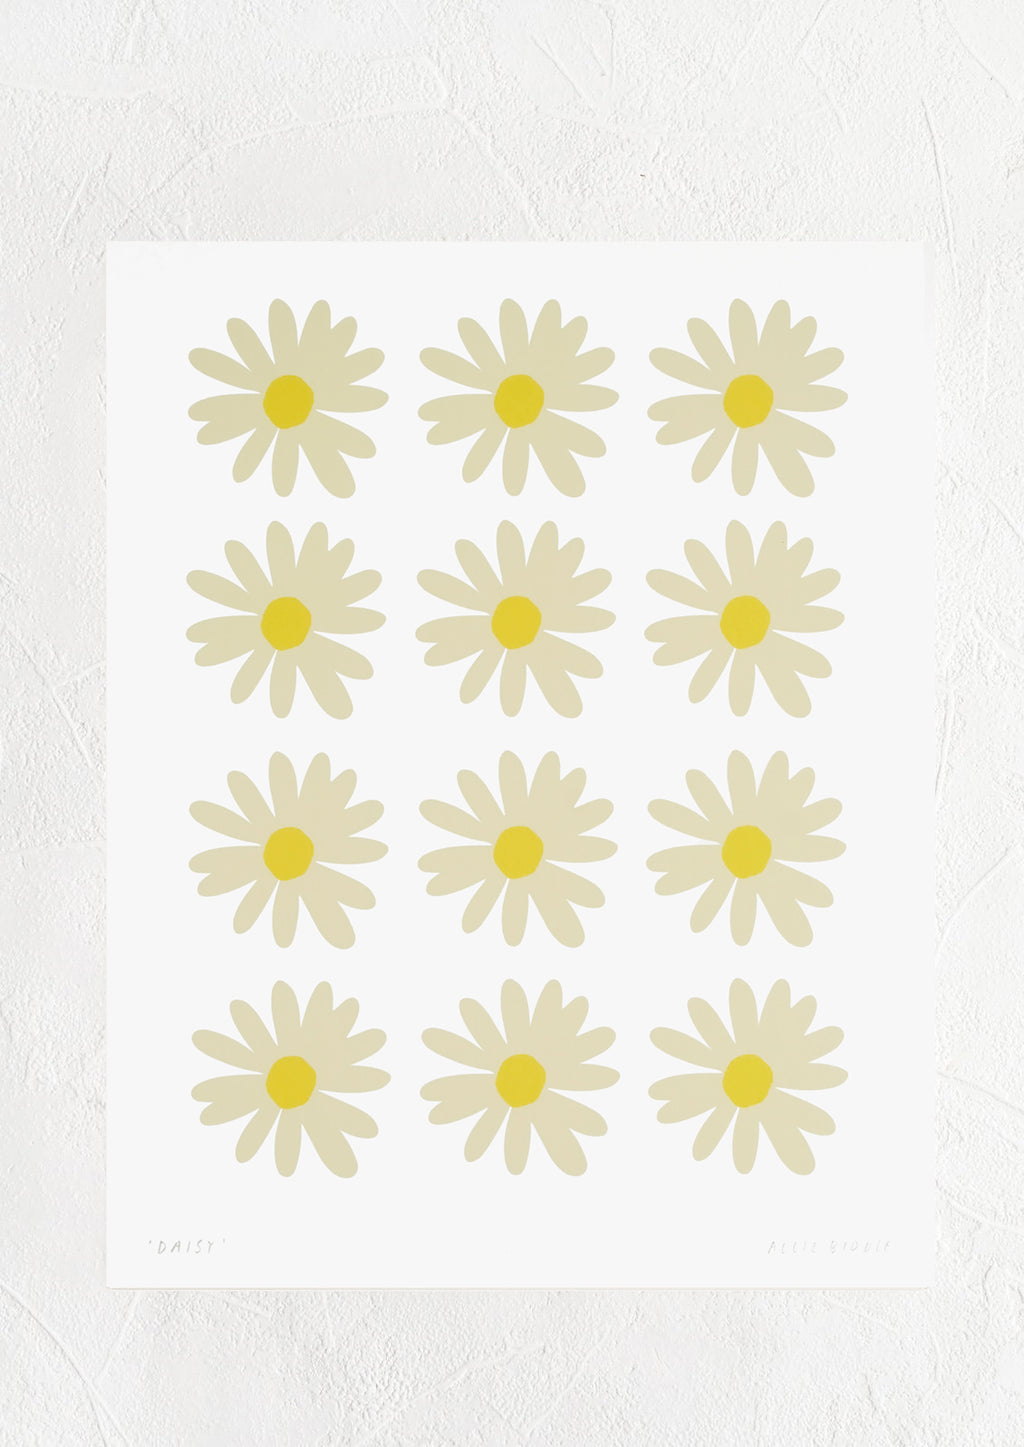 1: A digital art print featuring rows of daisy flowers.